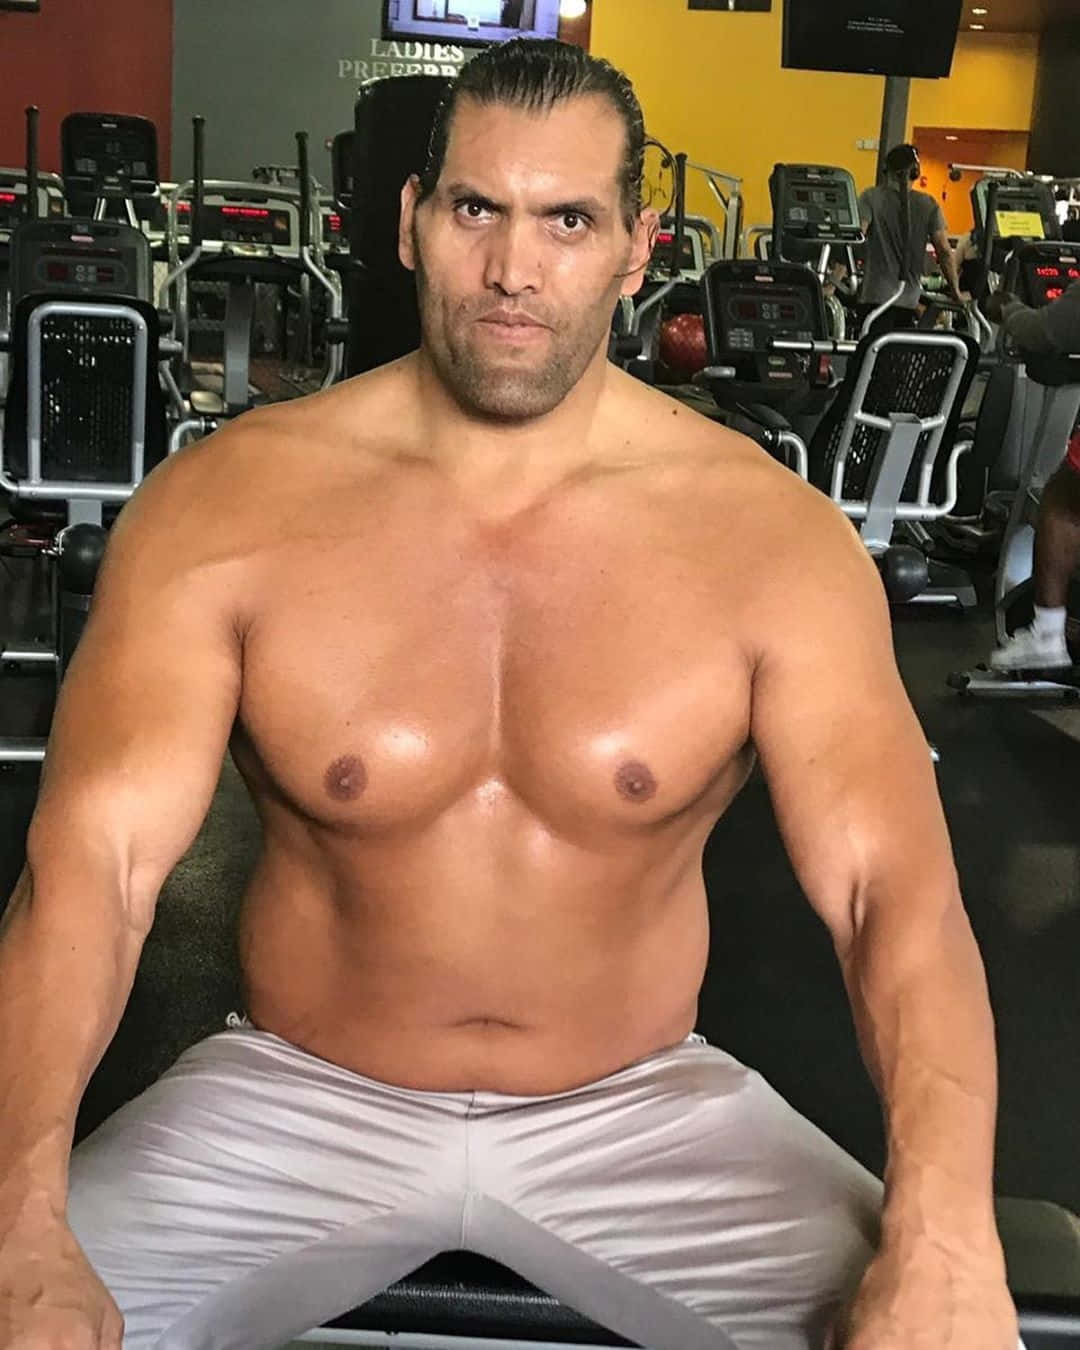 Dominating Strength - The Great Khali at Gym Wallpaper